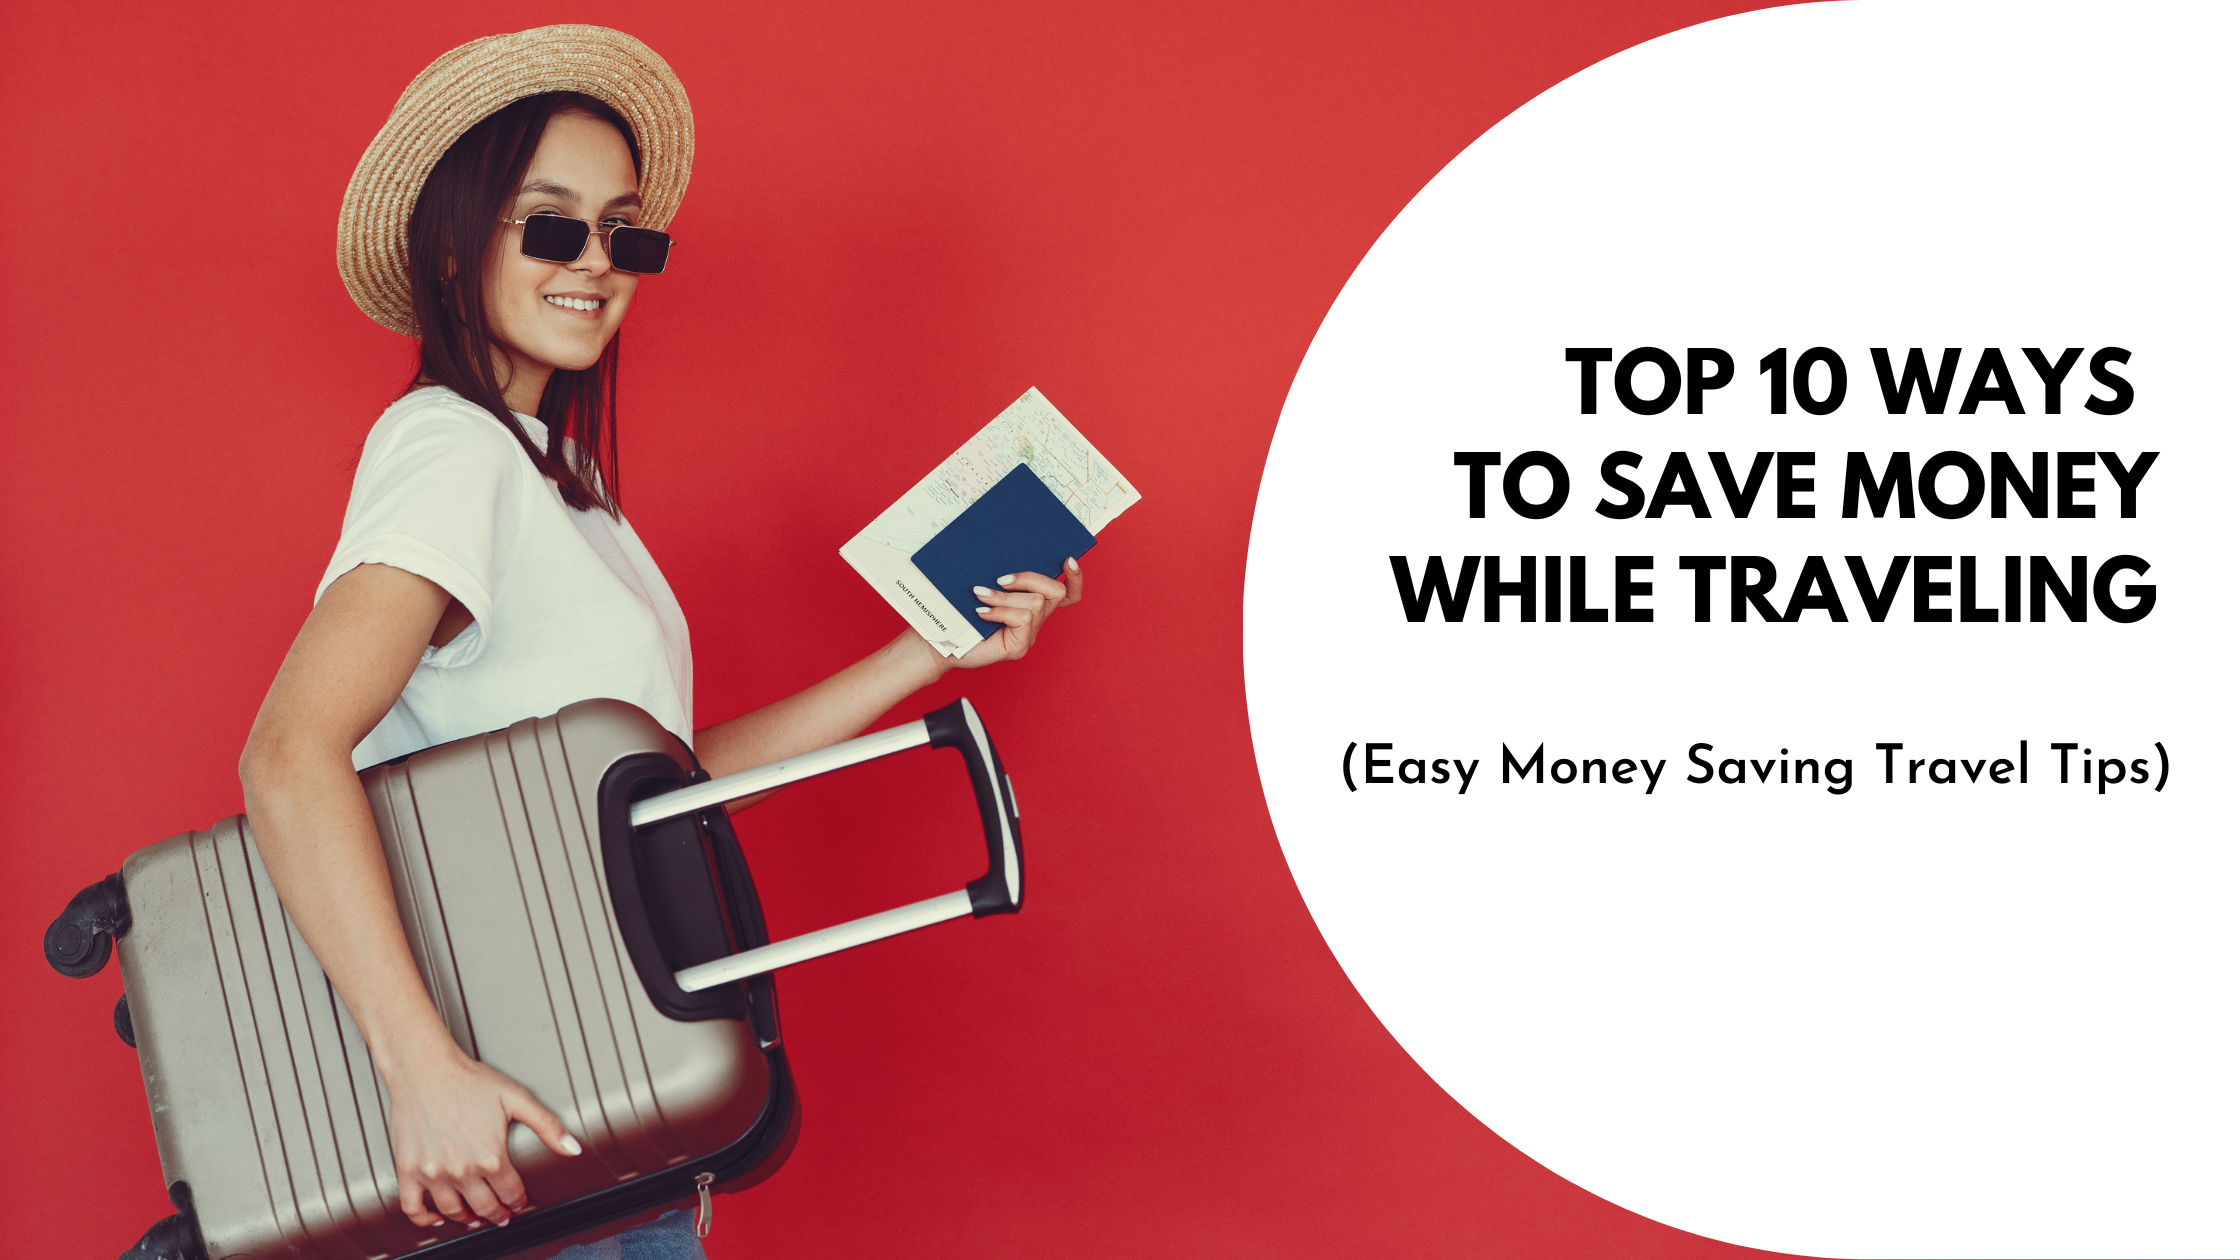 Top 10 Ways To Save Money While Traveling – Easy Money Saving Travel Tips